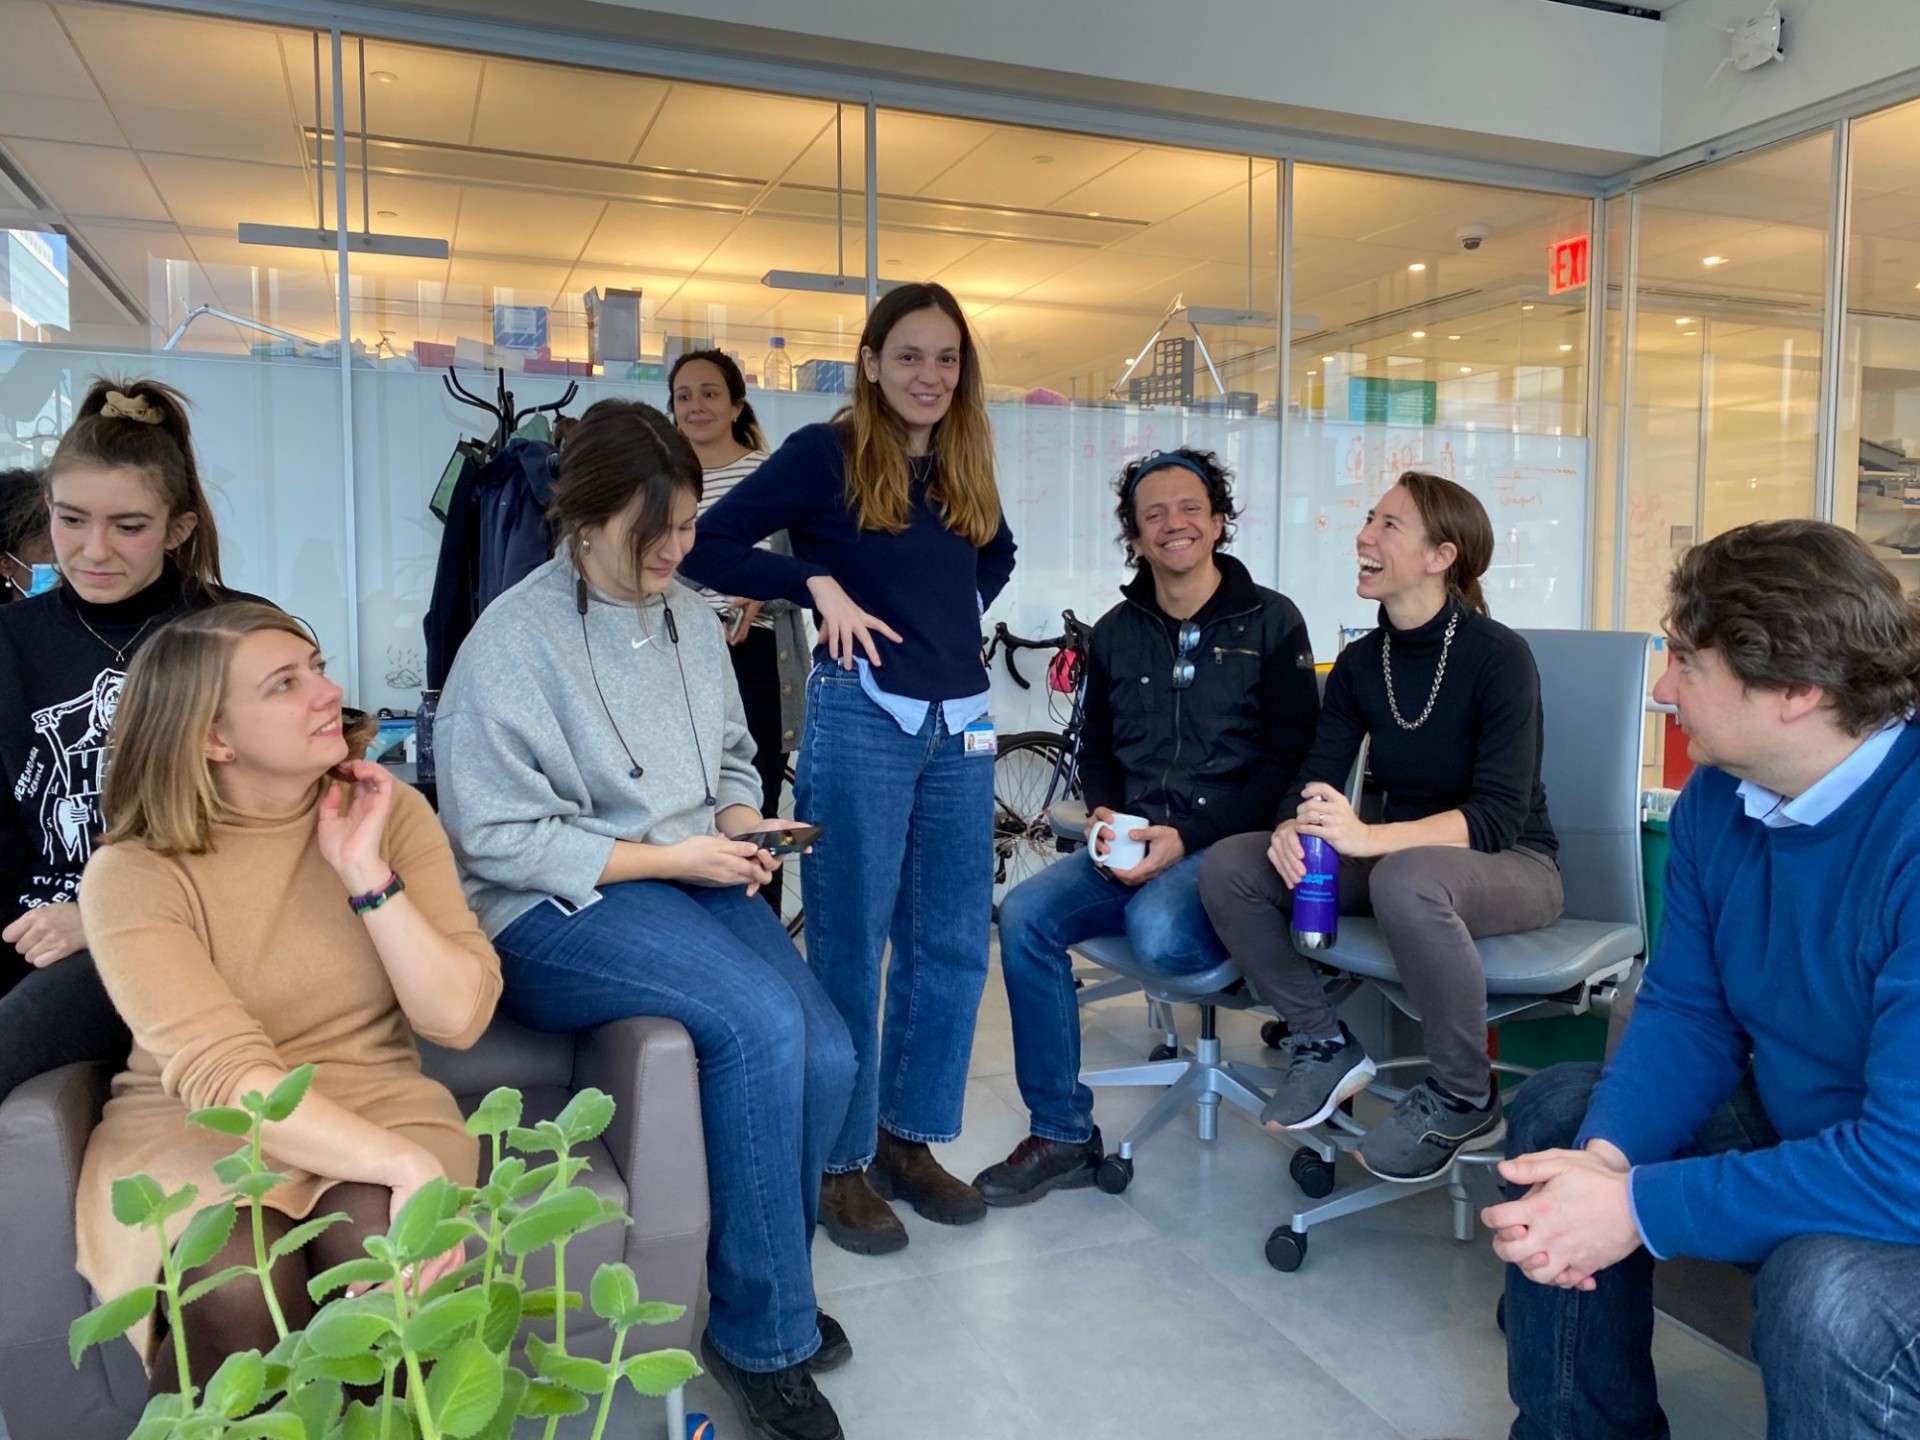 Alice, Alexa, Marianna, Olga, Joan , Albana, Martin, Rachel, and Stavros all gathered in a group in the interaction space. 